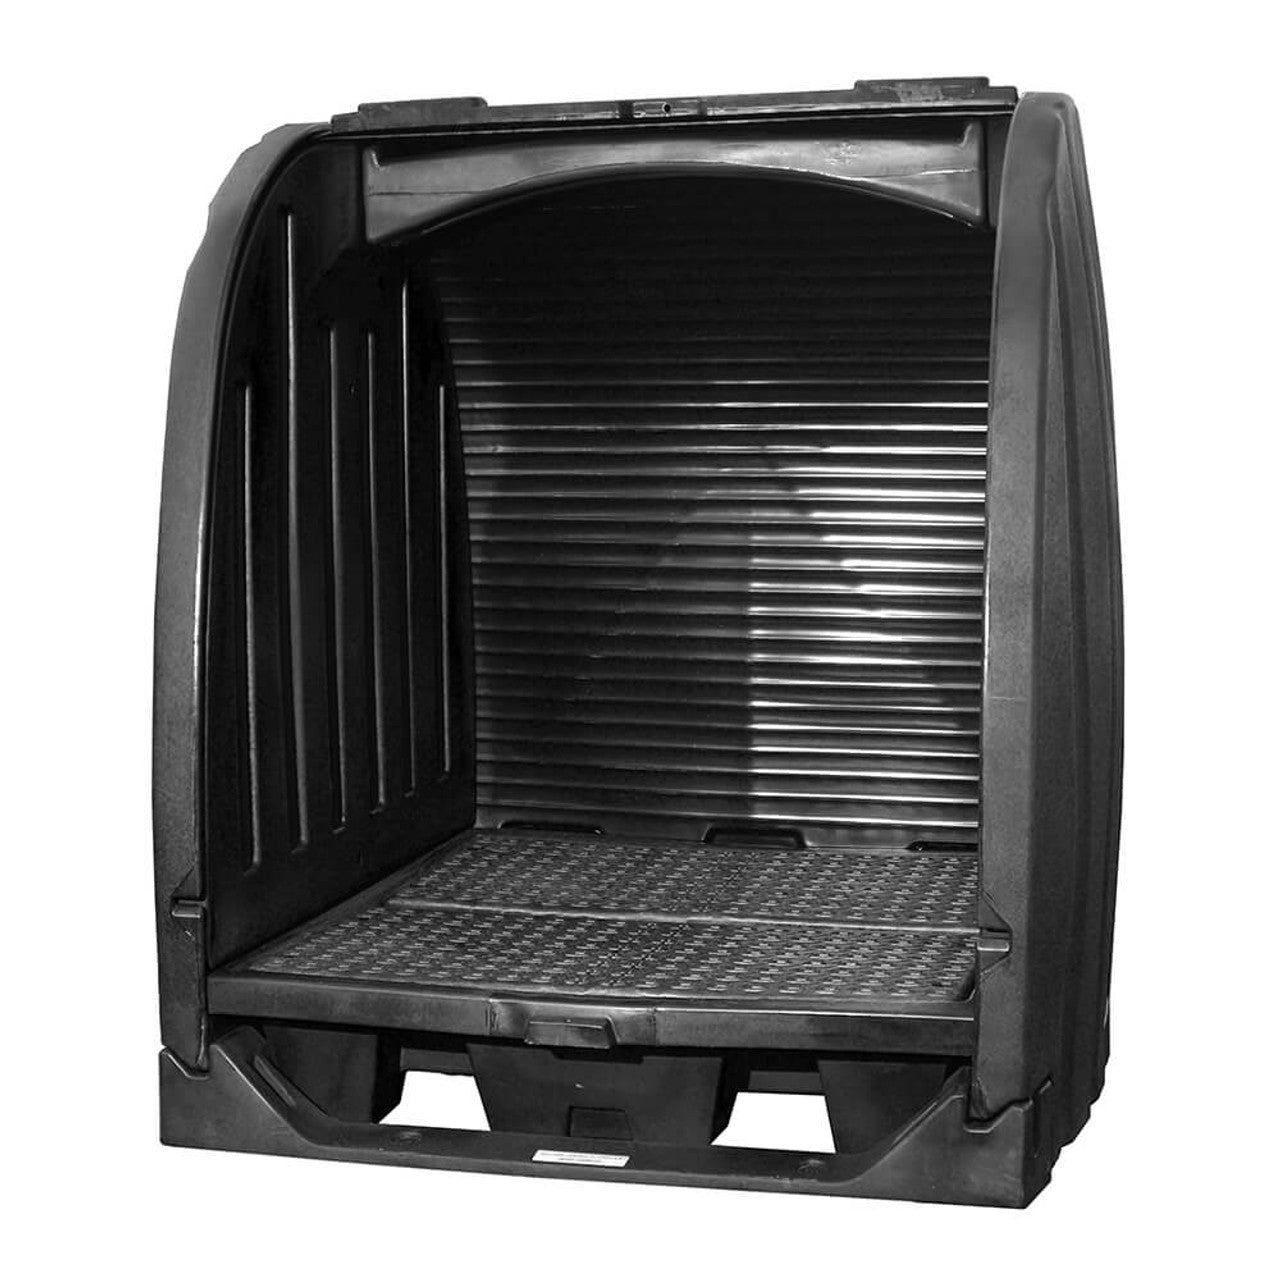 ENPAC - 4 Drum Outdoor Storage Spill Containment Shed, Black